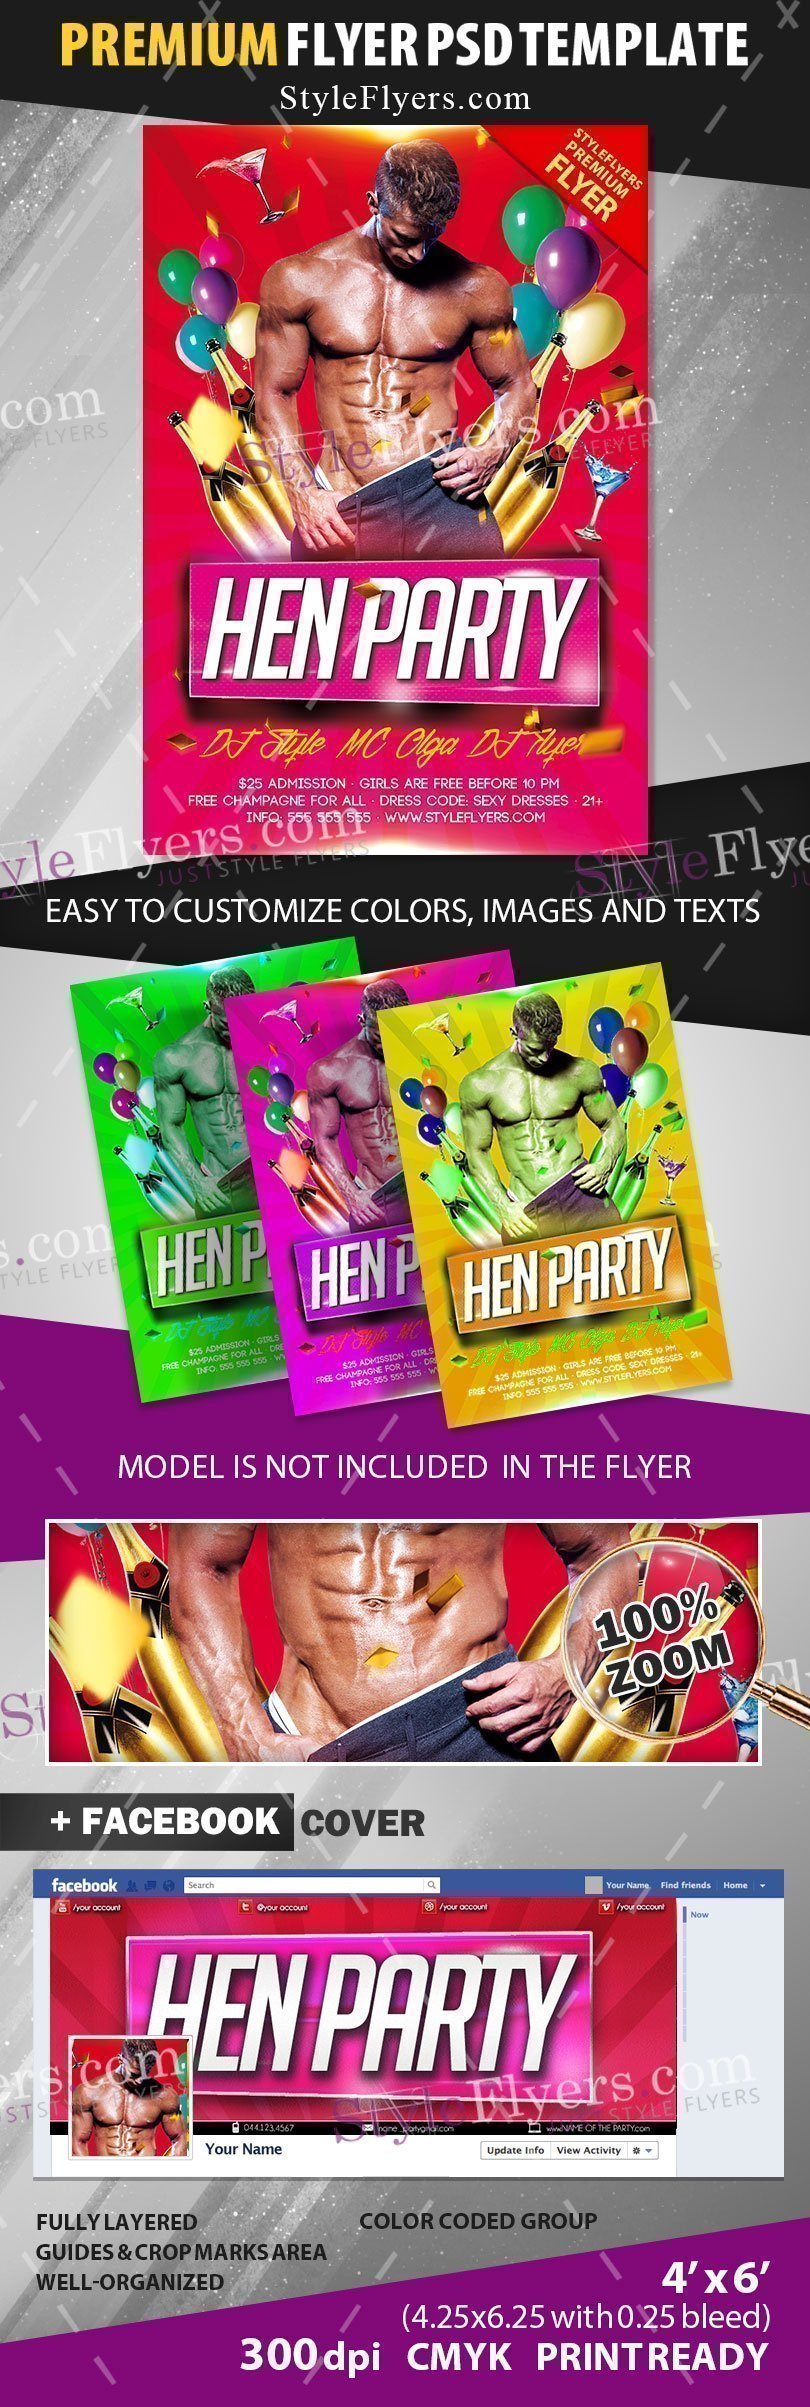 preview_hen_party_Flyer_premium_template